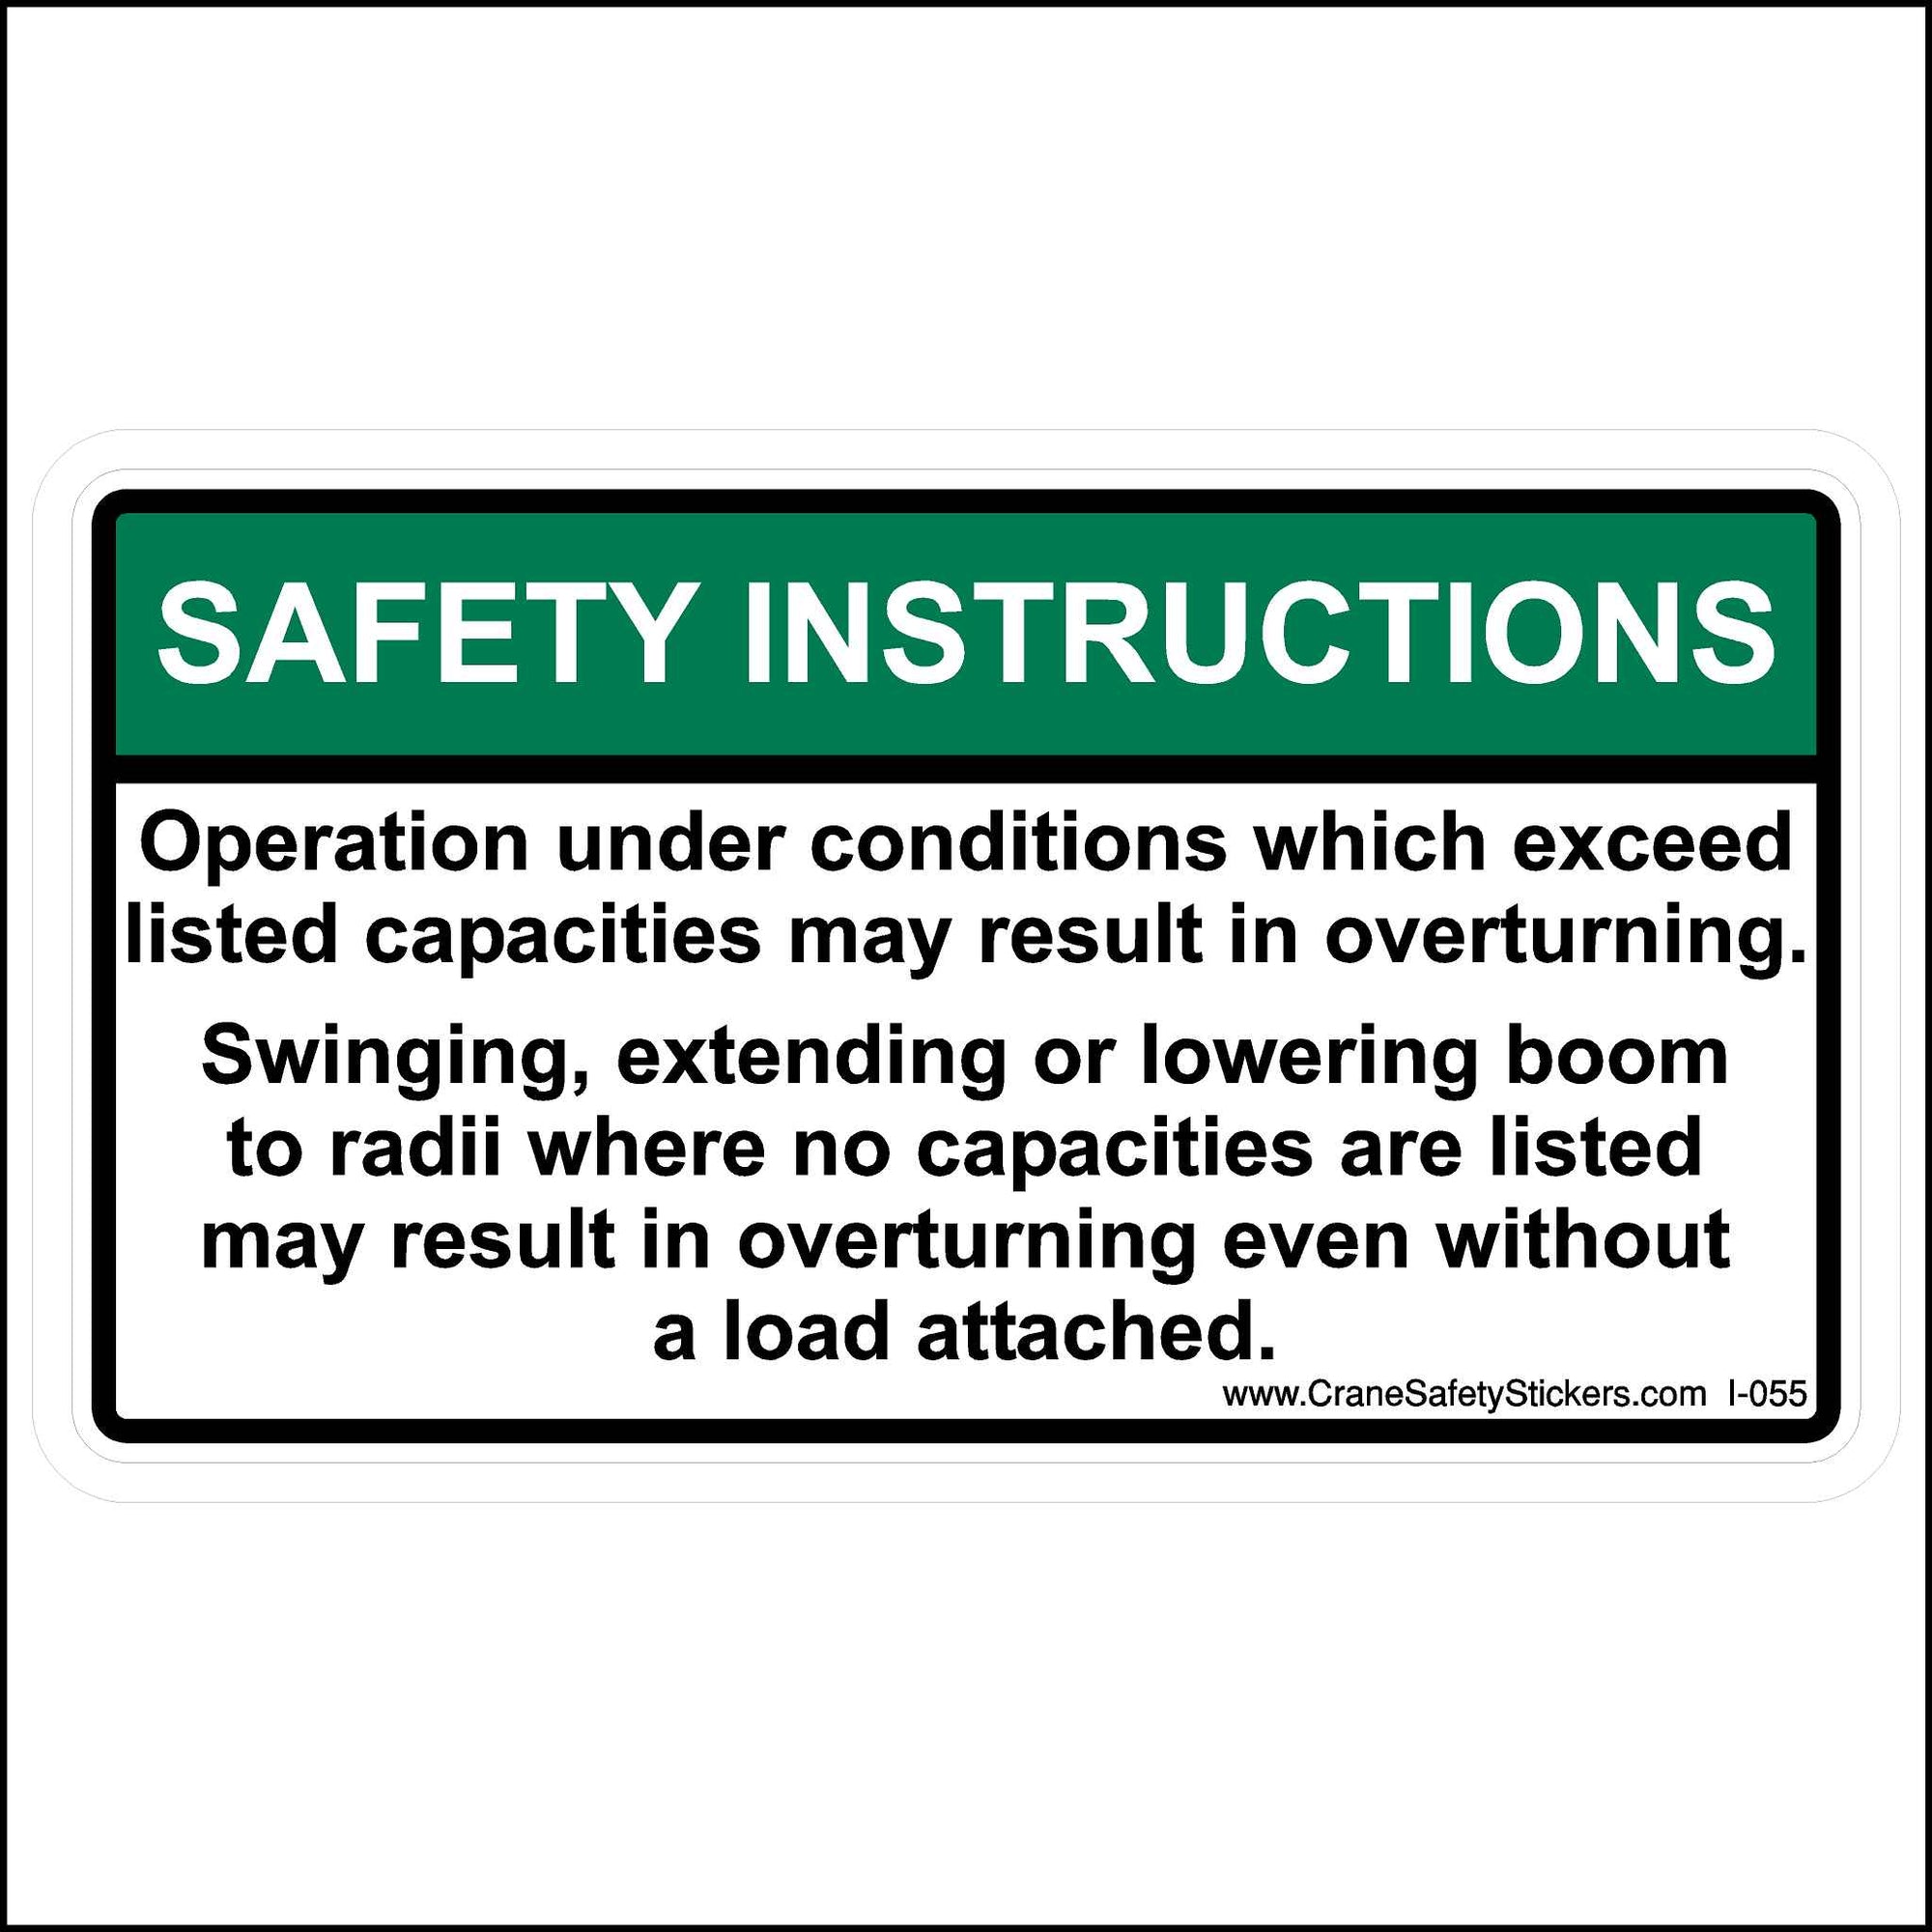 This crane tipping hazard sticker is printed with. Operation under conditions which exceed listed capacities may result in overturning. Swinging, extending, or lowering boom to radii where no capacities are listed may result in overturning even without a load attached.